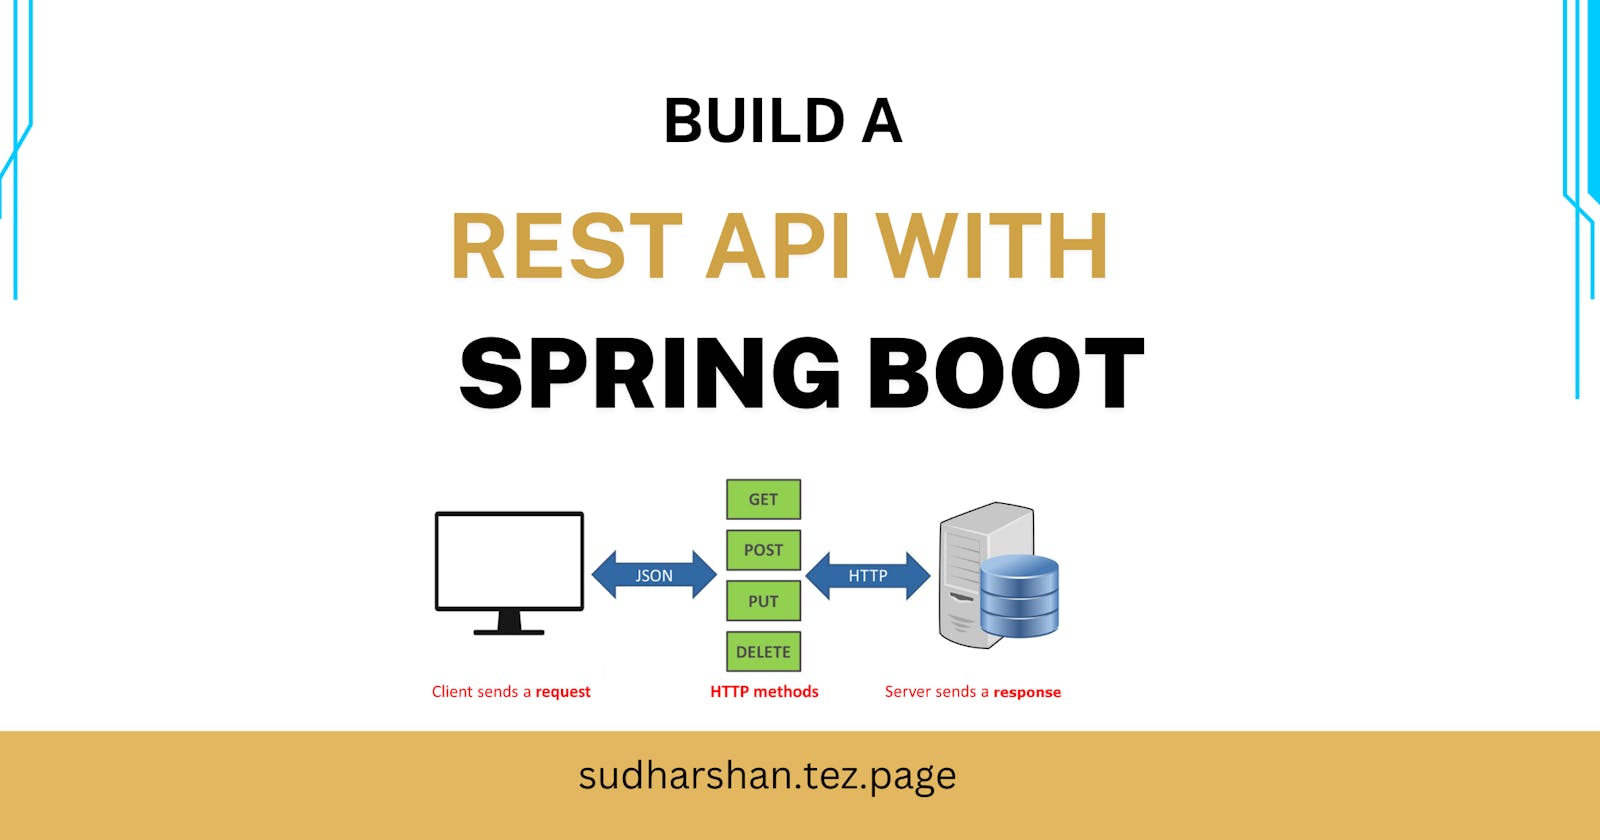 Build a REST API with Spring Boot